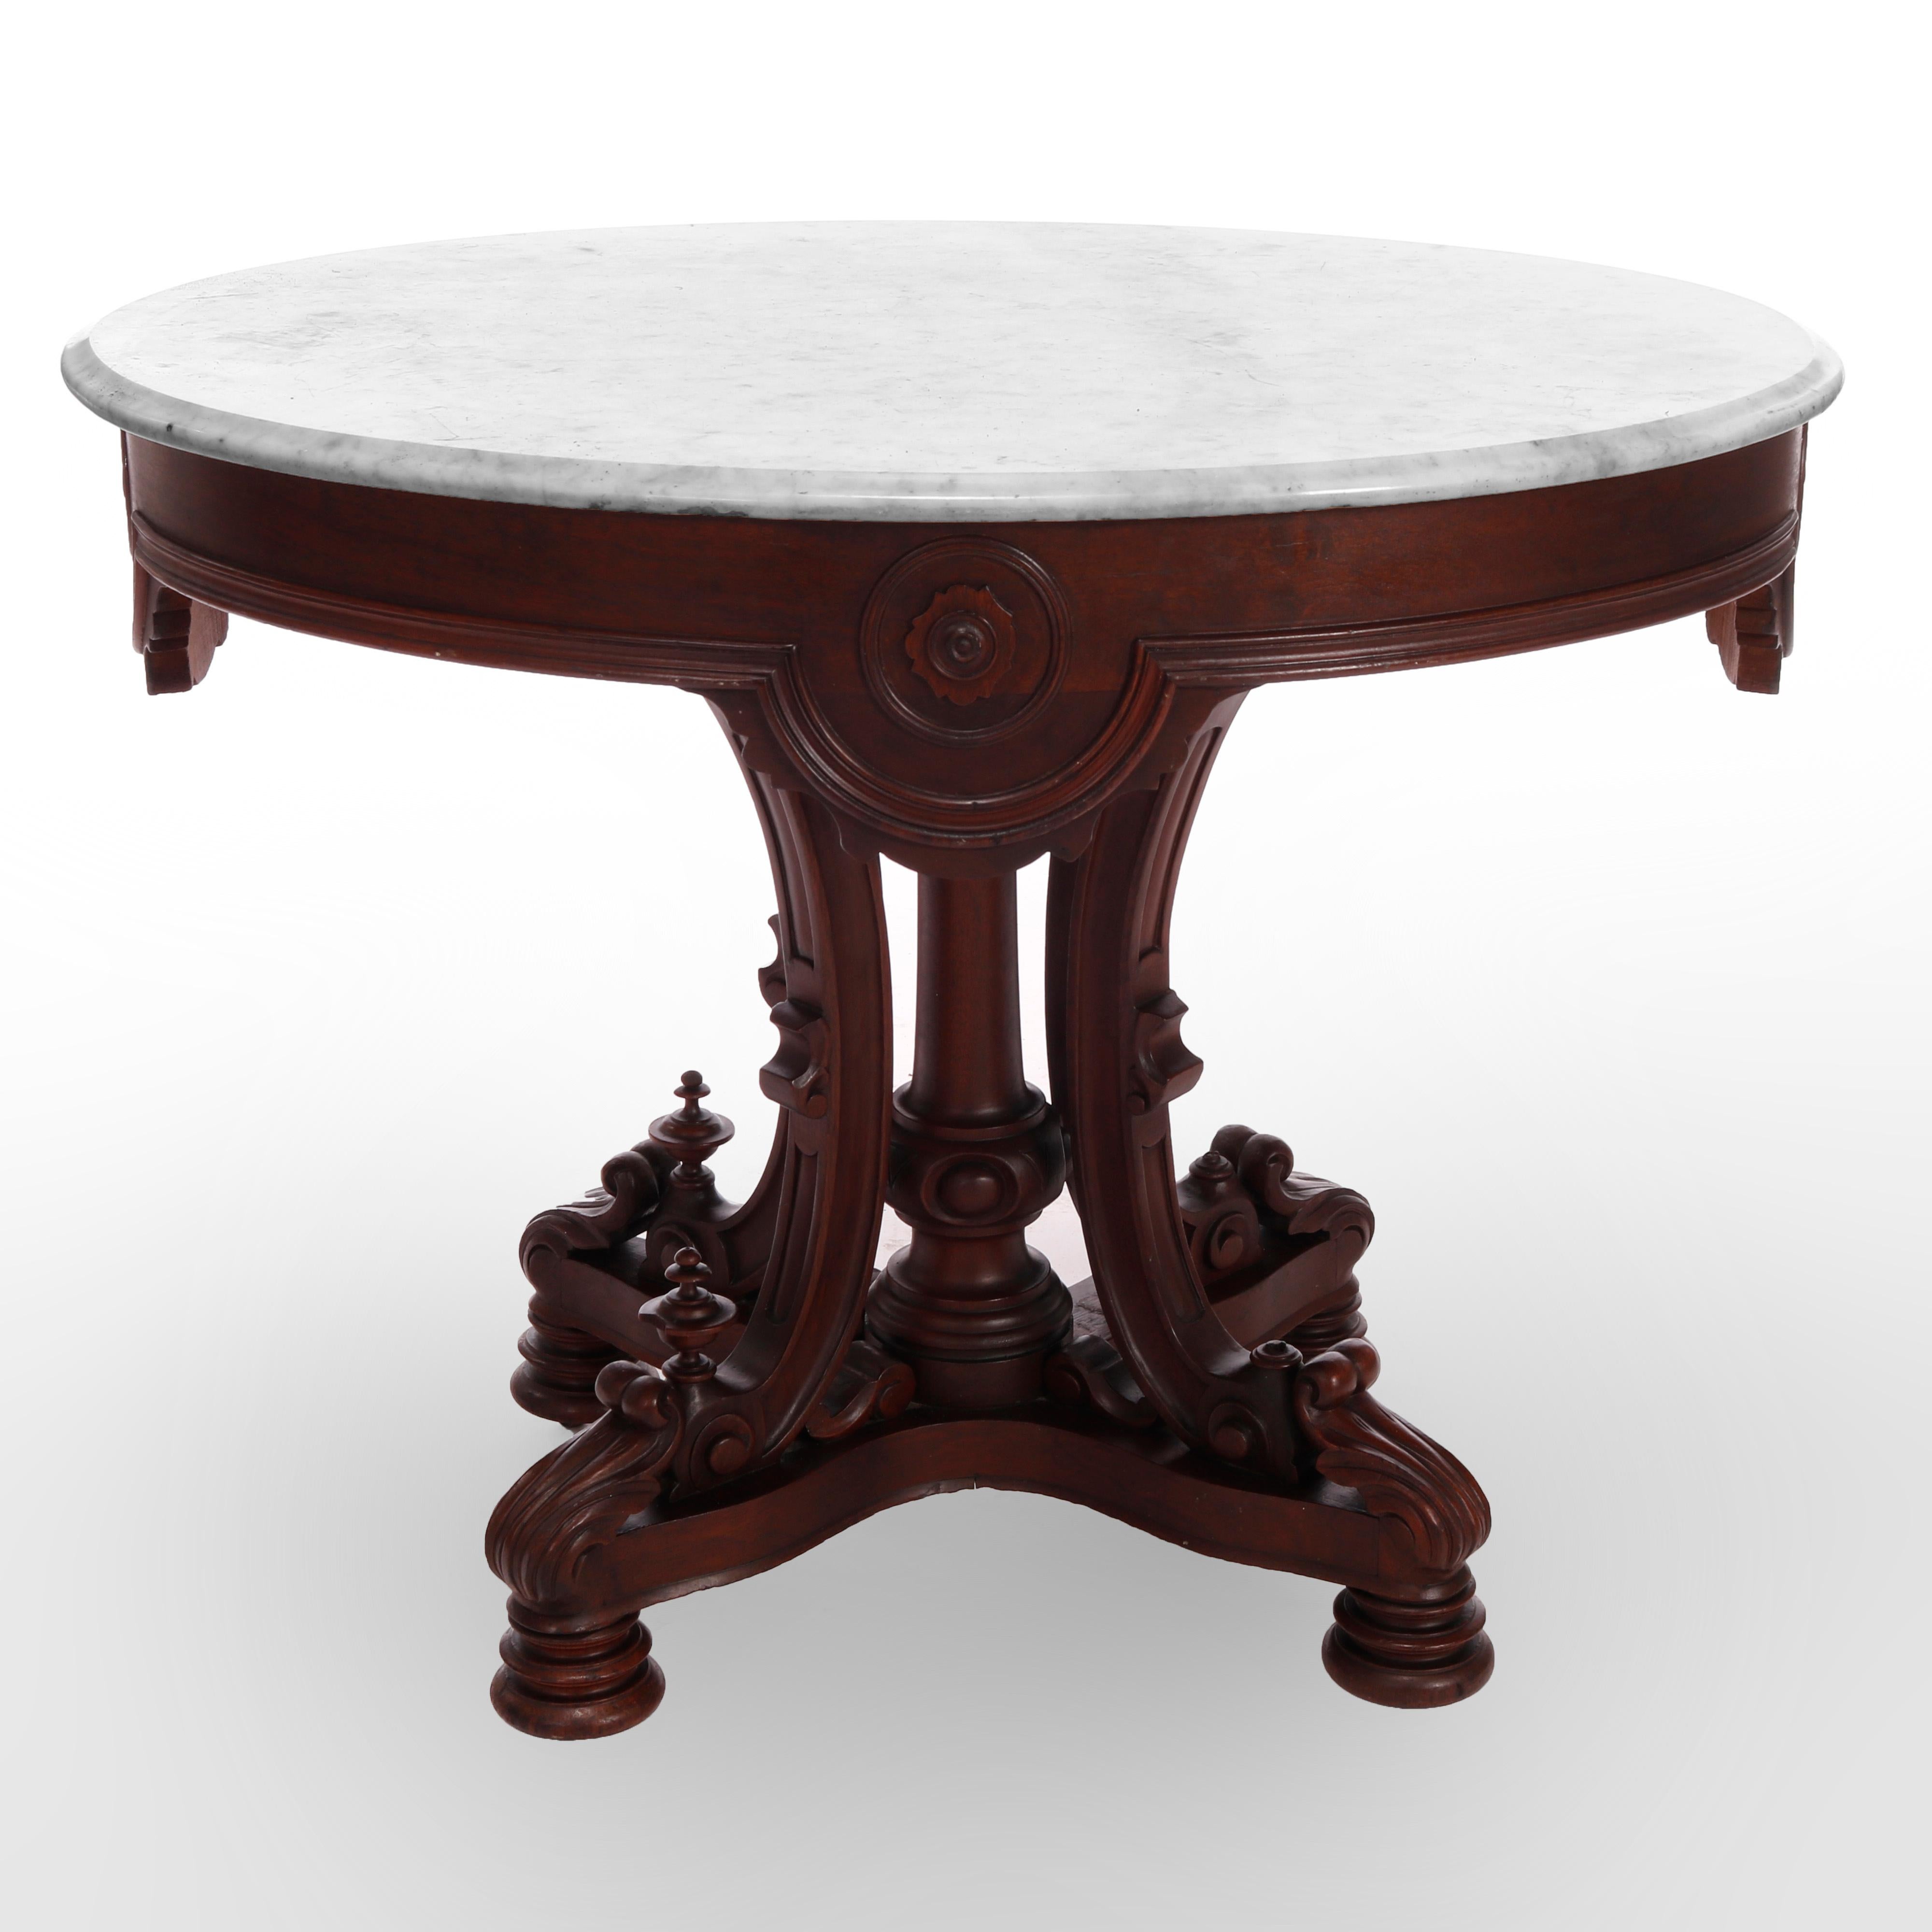 19th Century Antique Rococo Revival Carved Rosewood Oval Marble Top Table, Circa 1870